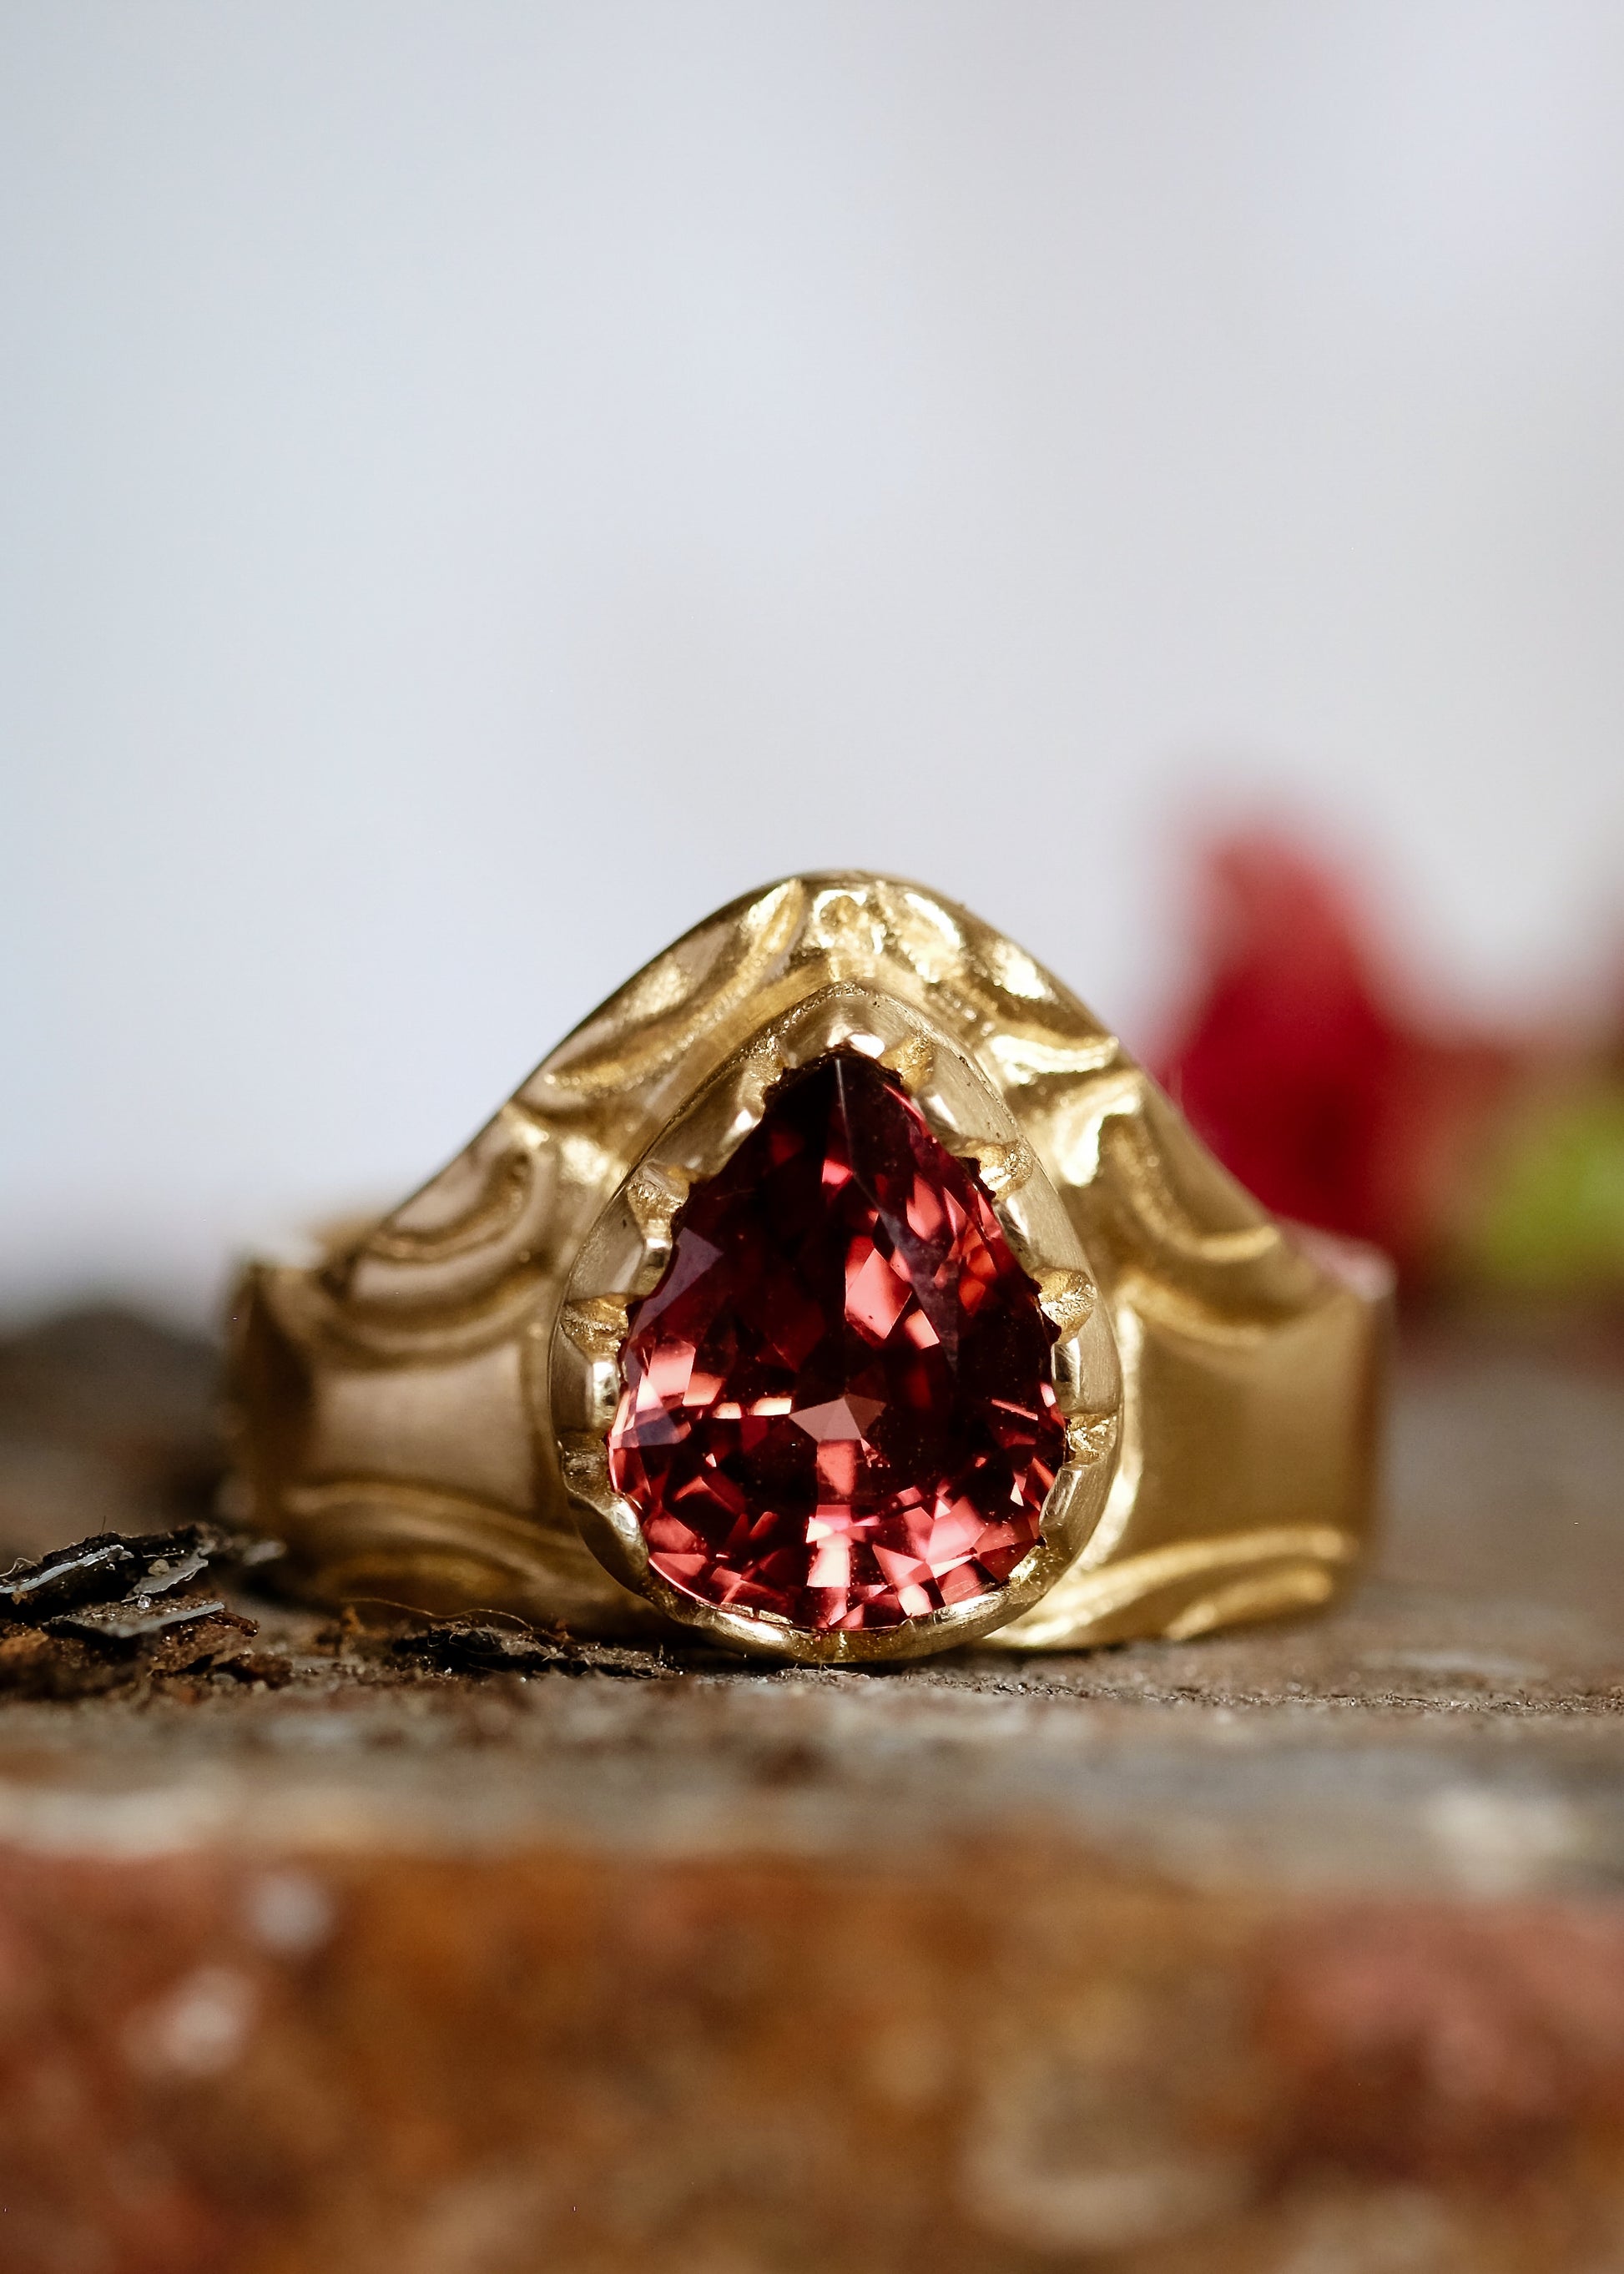 A study in strength and courage. The Valor ring relishes its prominence, the high arch shape a nod to the architectural element that can bear the unimaginable. A large reddish zircon nestles into the surrounding gold that has been hand-carved to showcase its beauty.